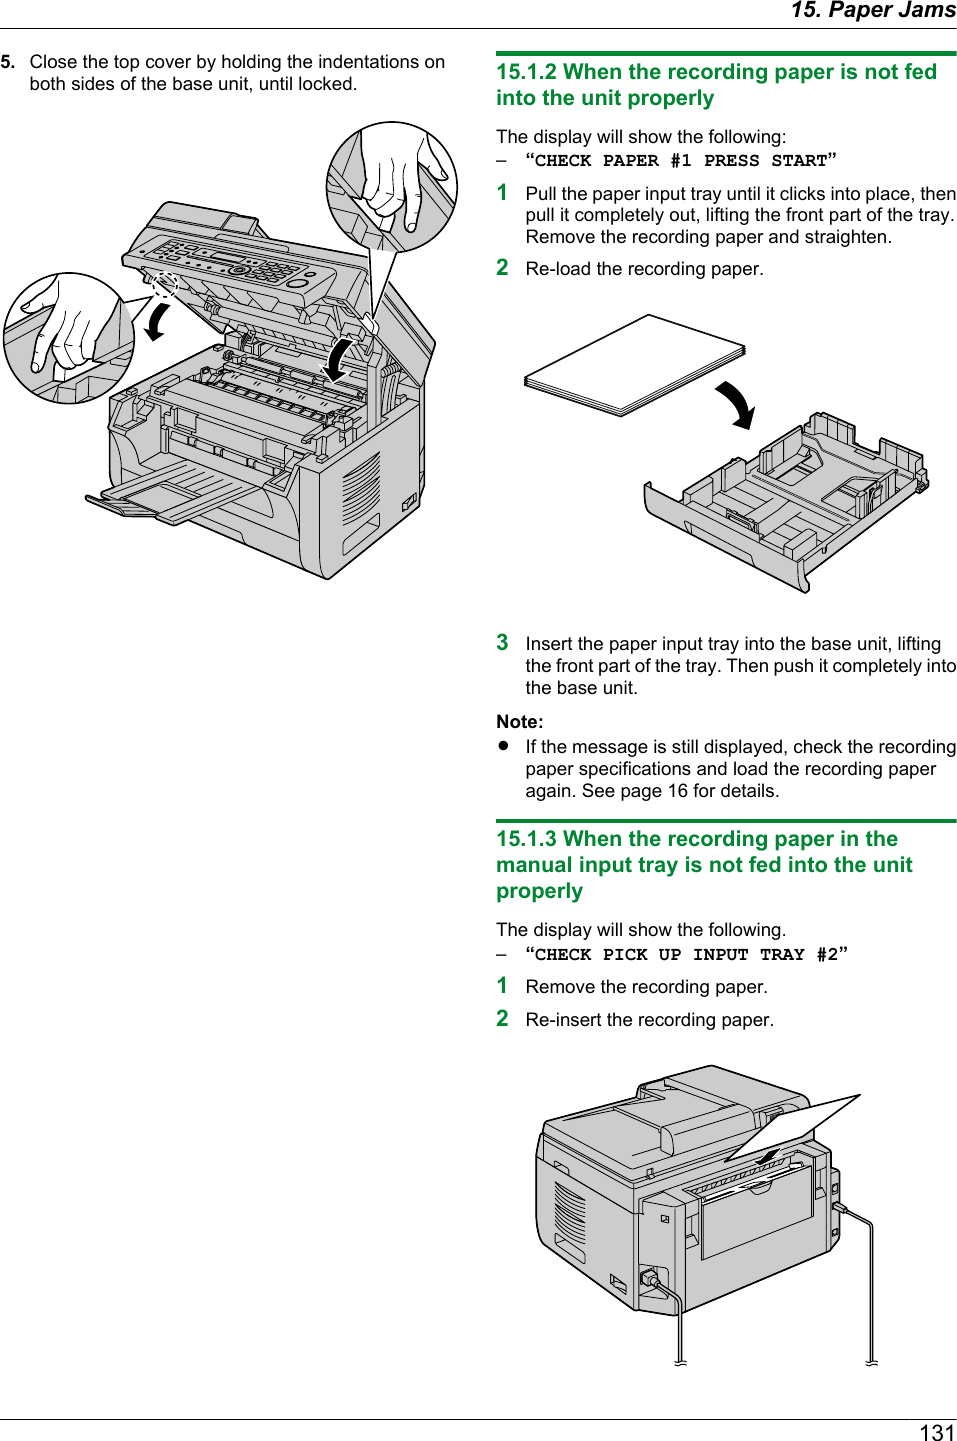 5. Close the top cover by holding the indentations onboth sides of the base unit, until locked. 15.1.2 When the recording paper is not fedinto the unit properlyThe display will show the following:–“CHECK PAPER #1 PRESS START”1Pull the paper input tray until it clicks into place, thenpull it completely out, lifting the front part of the tray.Remove the recording paper and straighten.2Re-load the recording paper.3Insert the paper input tray into the base unit, liftingthe front part of the tray. Then push it completely intothe base unit.Note:RIf the message is still displayed, check the recordingpaper specifications and load the recording paperagain. See page 16 for details.15.1.3 When the recording paper in themanual input tray is not fed into the unitproperlyThe display will show the following.–“CHECK PICK UP INPUT TRAY #2”1Remove the recording paper.2Re-insert the recording paper.13115. Paper Jams